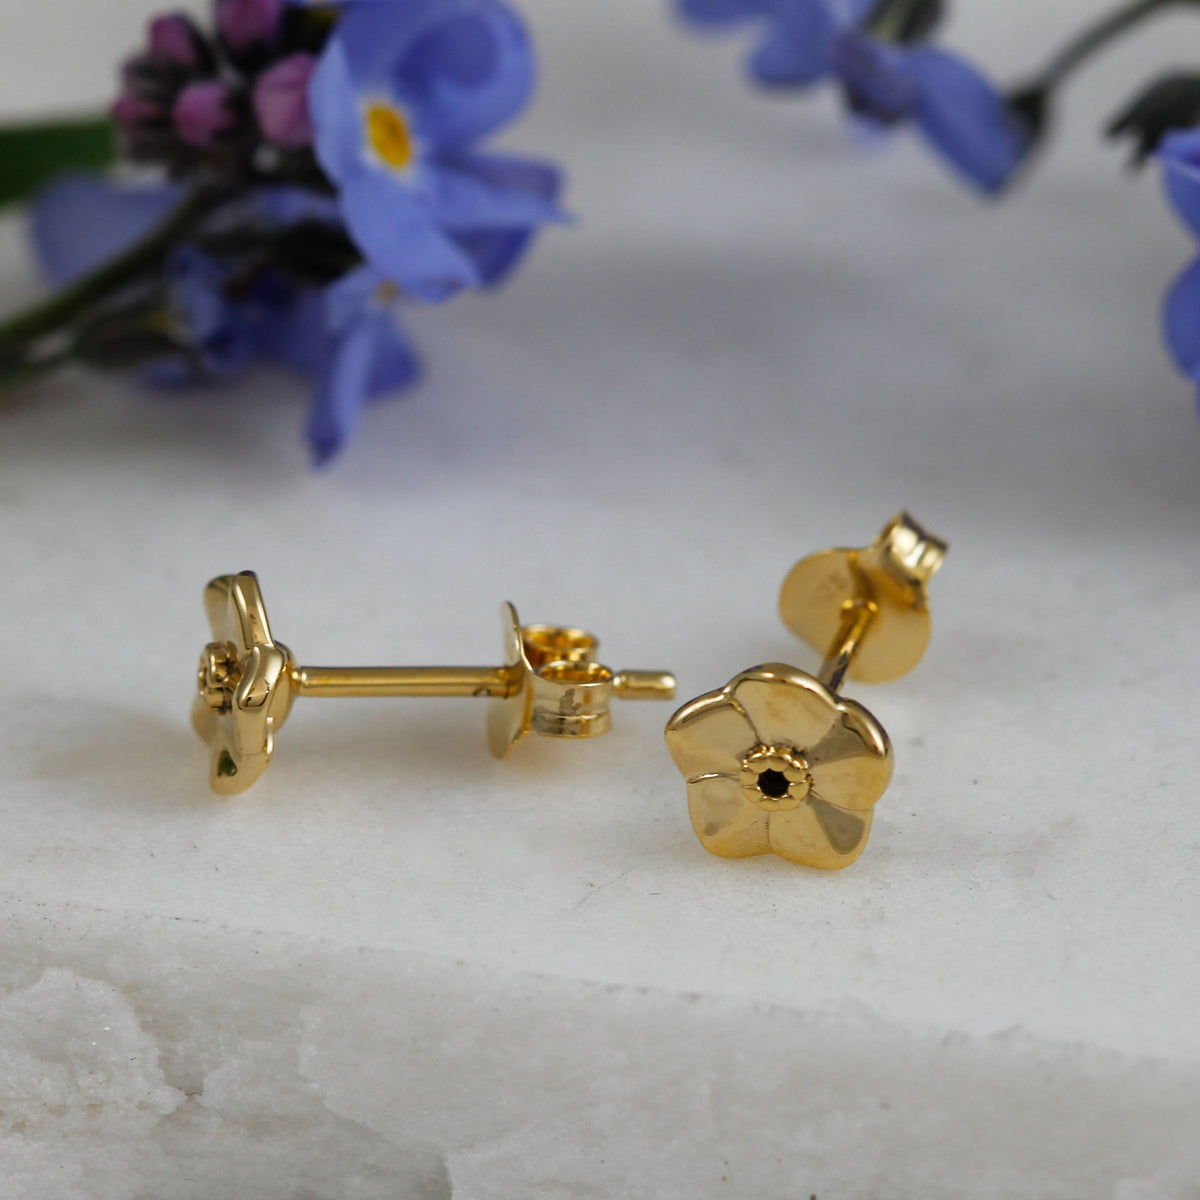 forget me not alzheimers flower gold vermeil small sized stud earrings